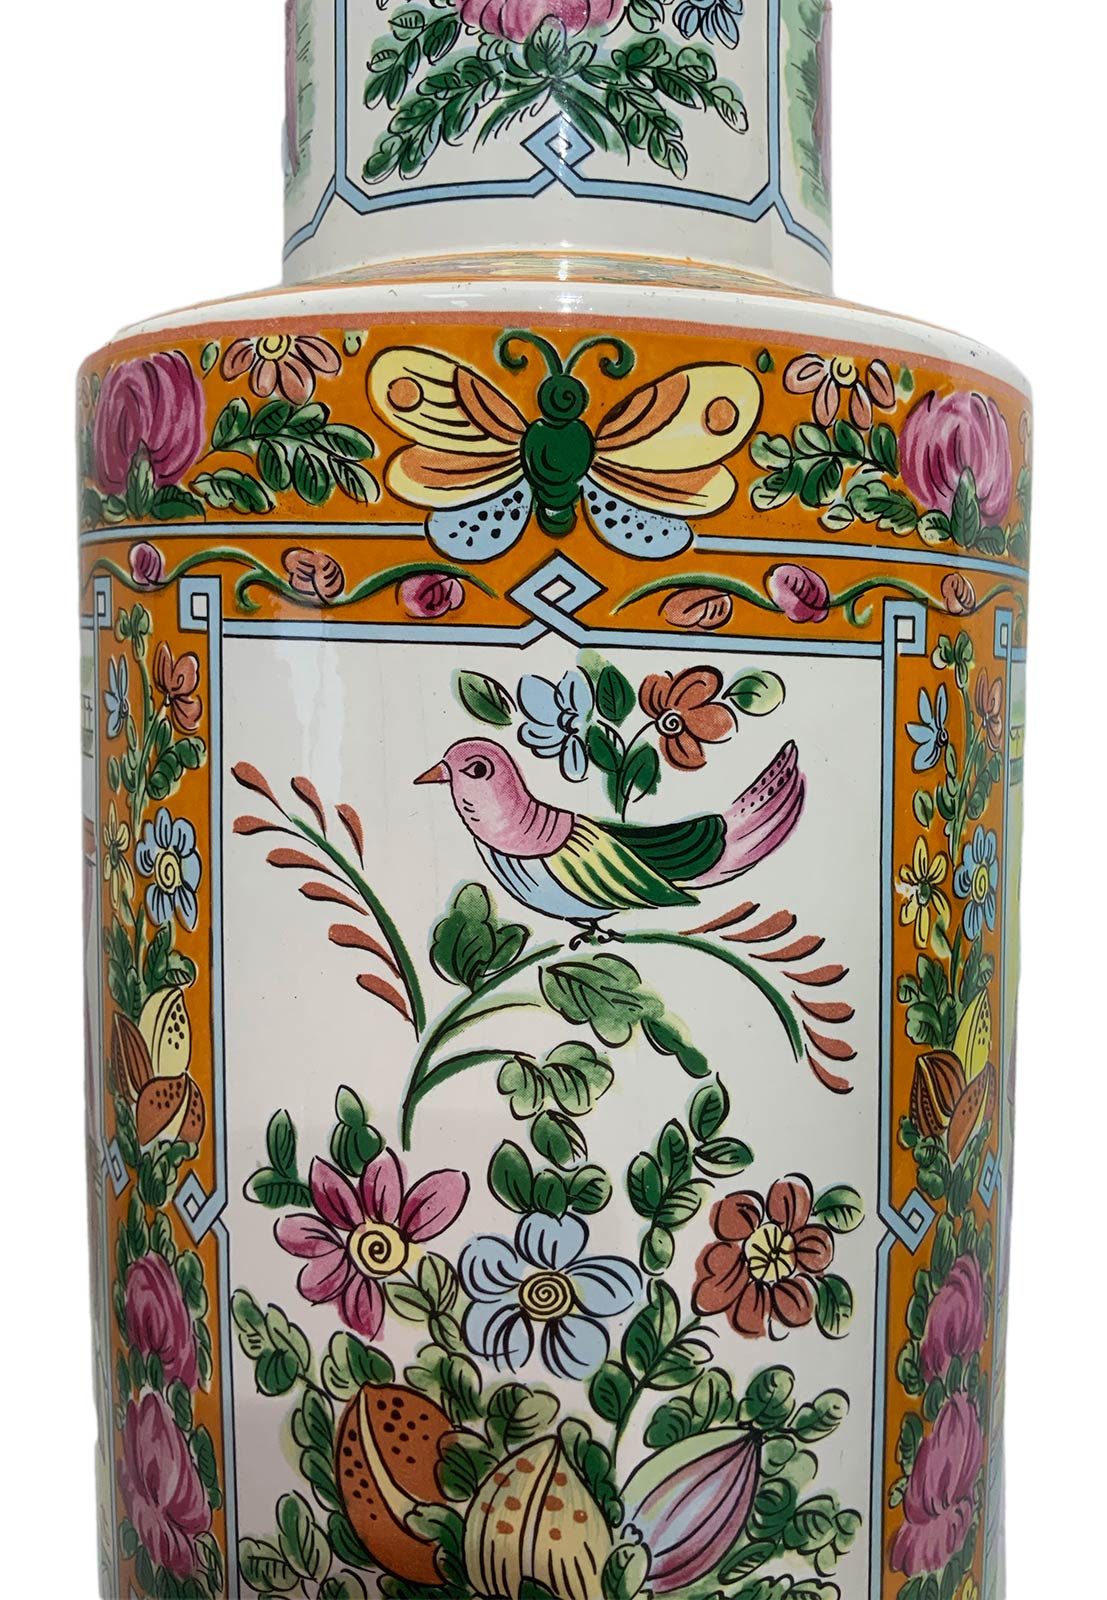 Porcelain vase depicting genre scenes and floral motifs, China, XX century. Mark on the base. H 46 - Image 3 of 4